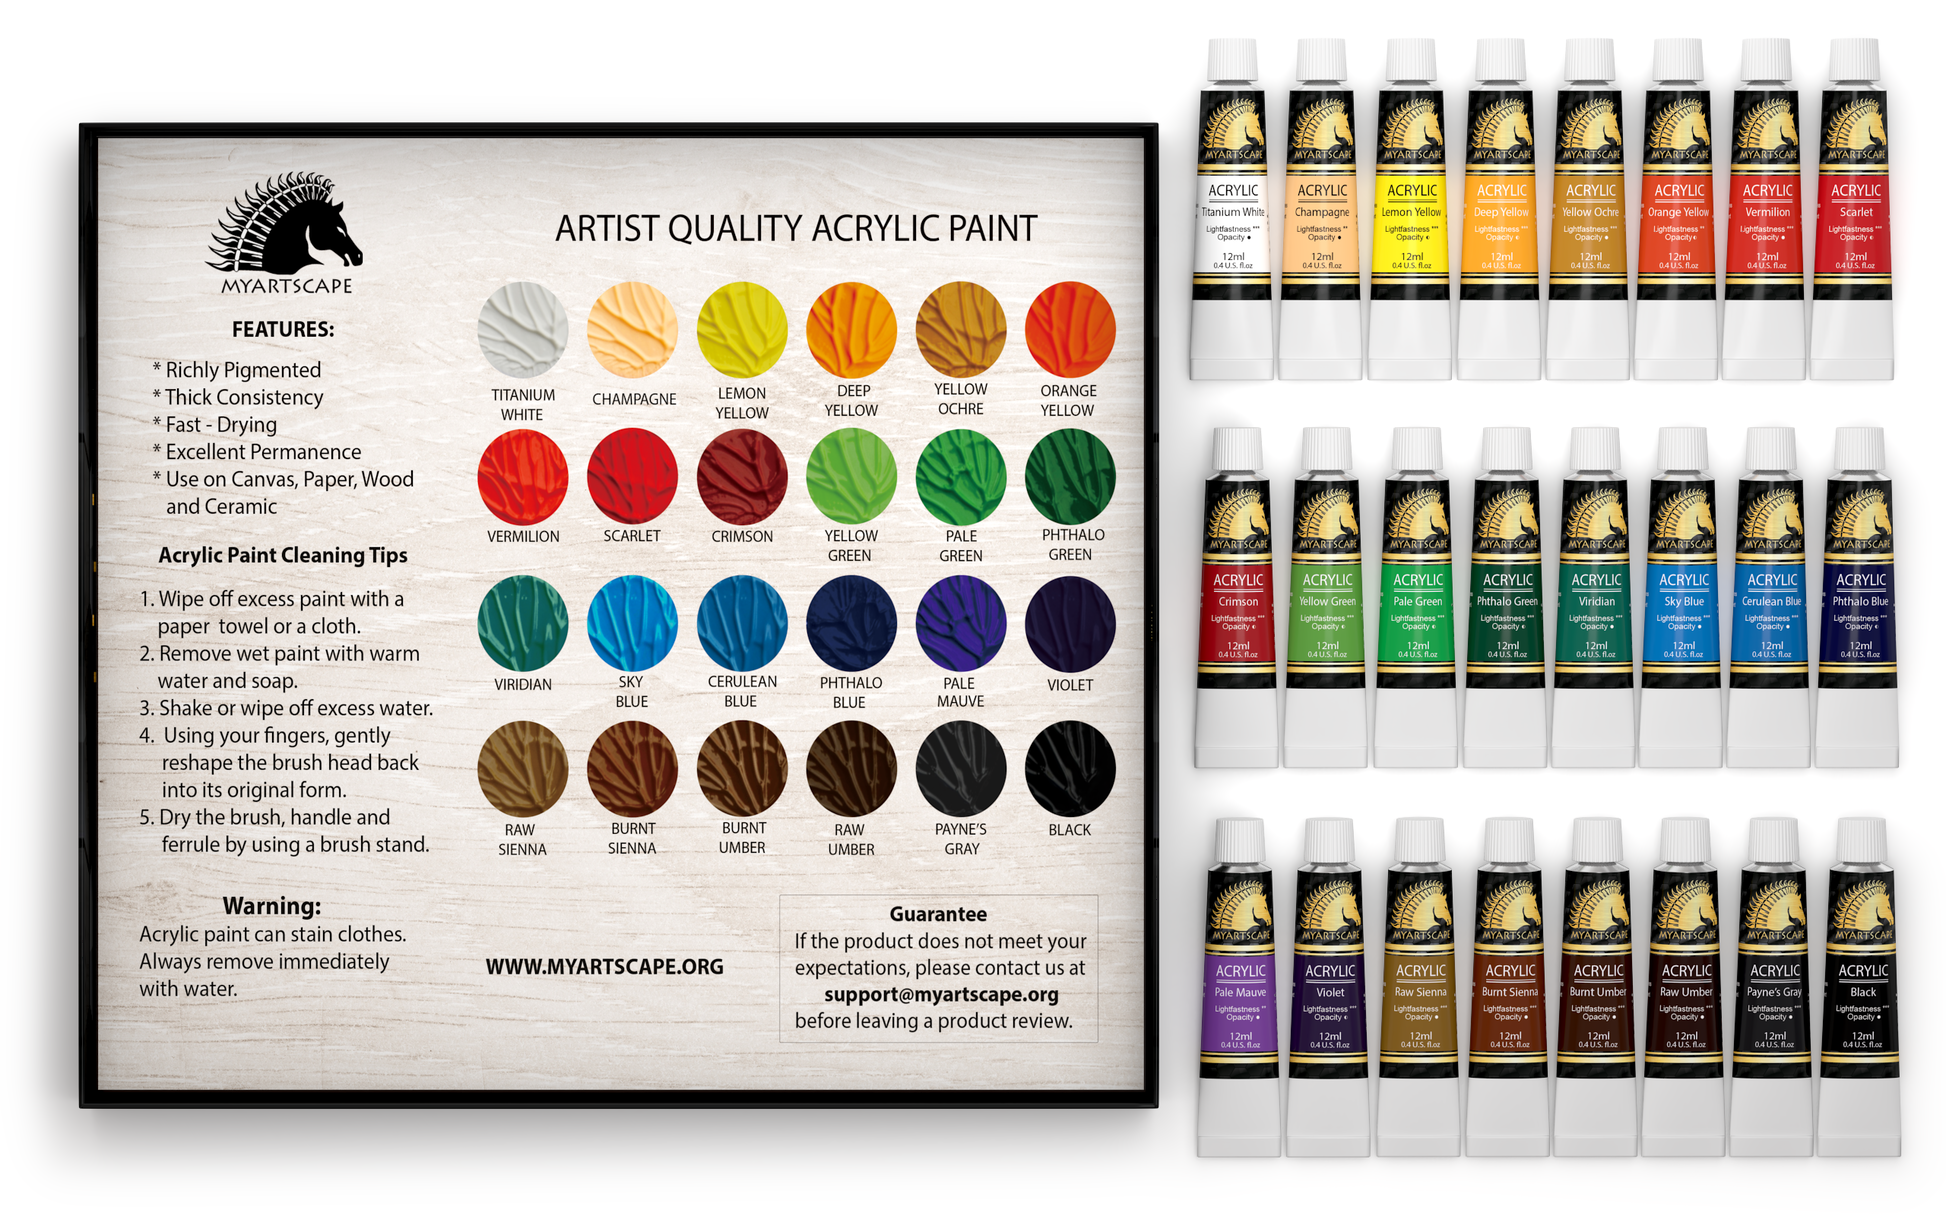 myartscape paint features fast drying